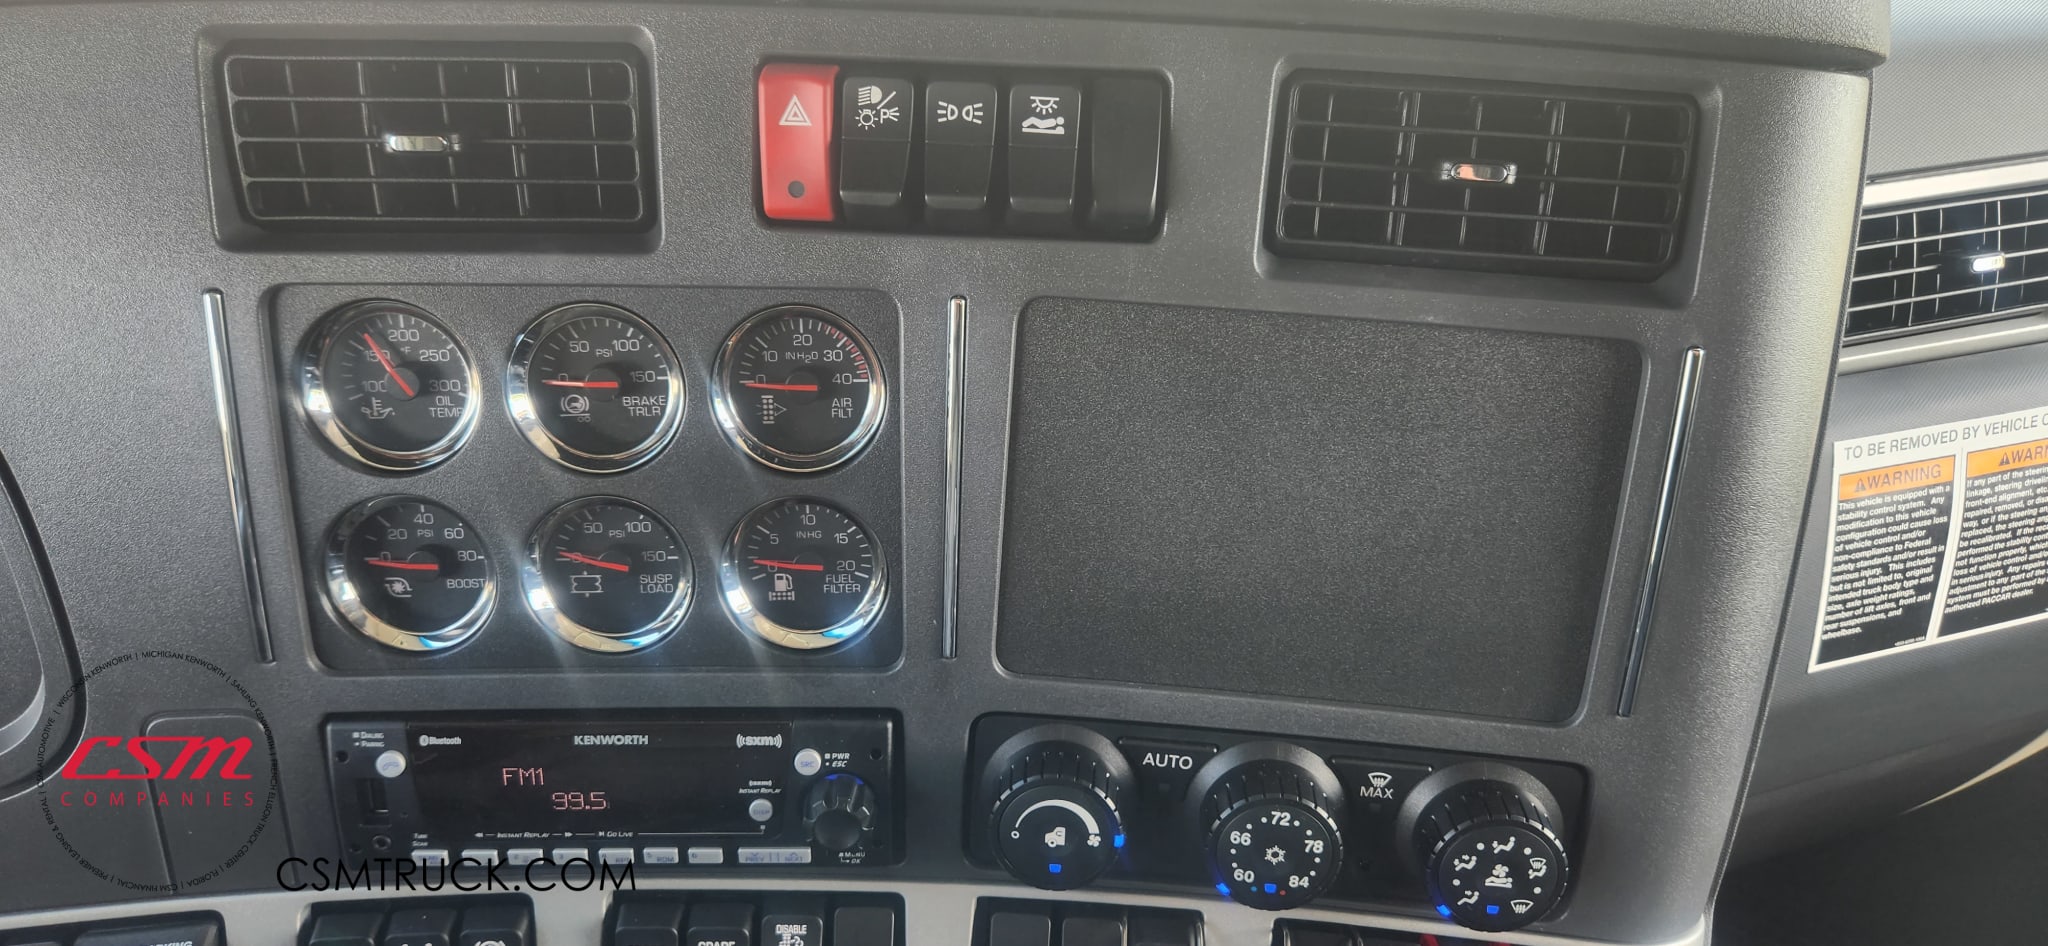 Interior radio and navigation system for this 2024 Kenworth T680 (Stock number: RJ354229)